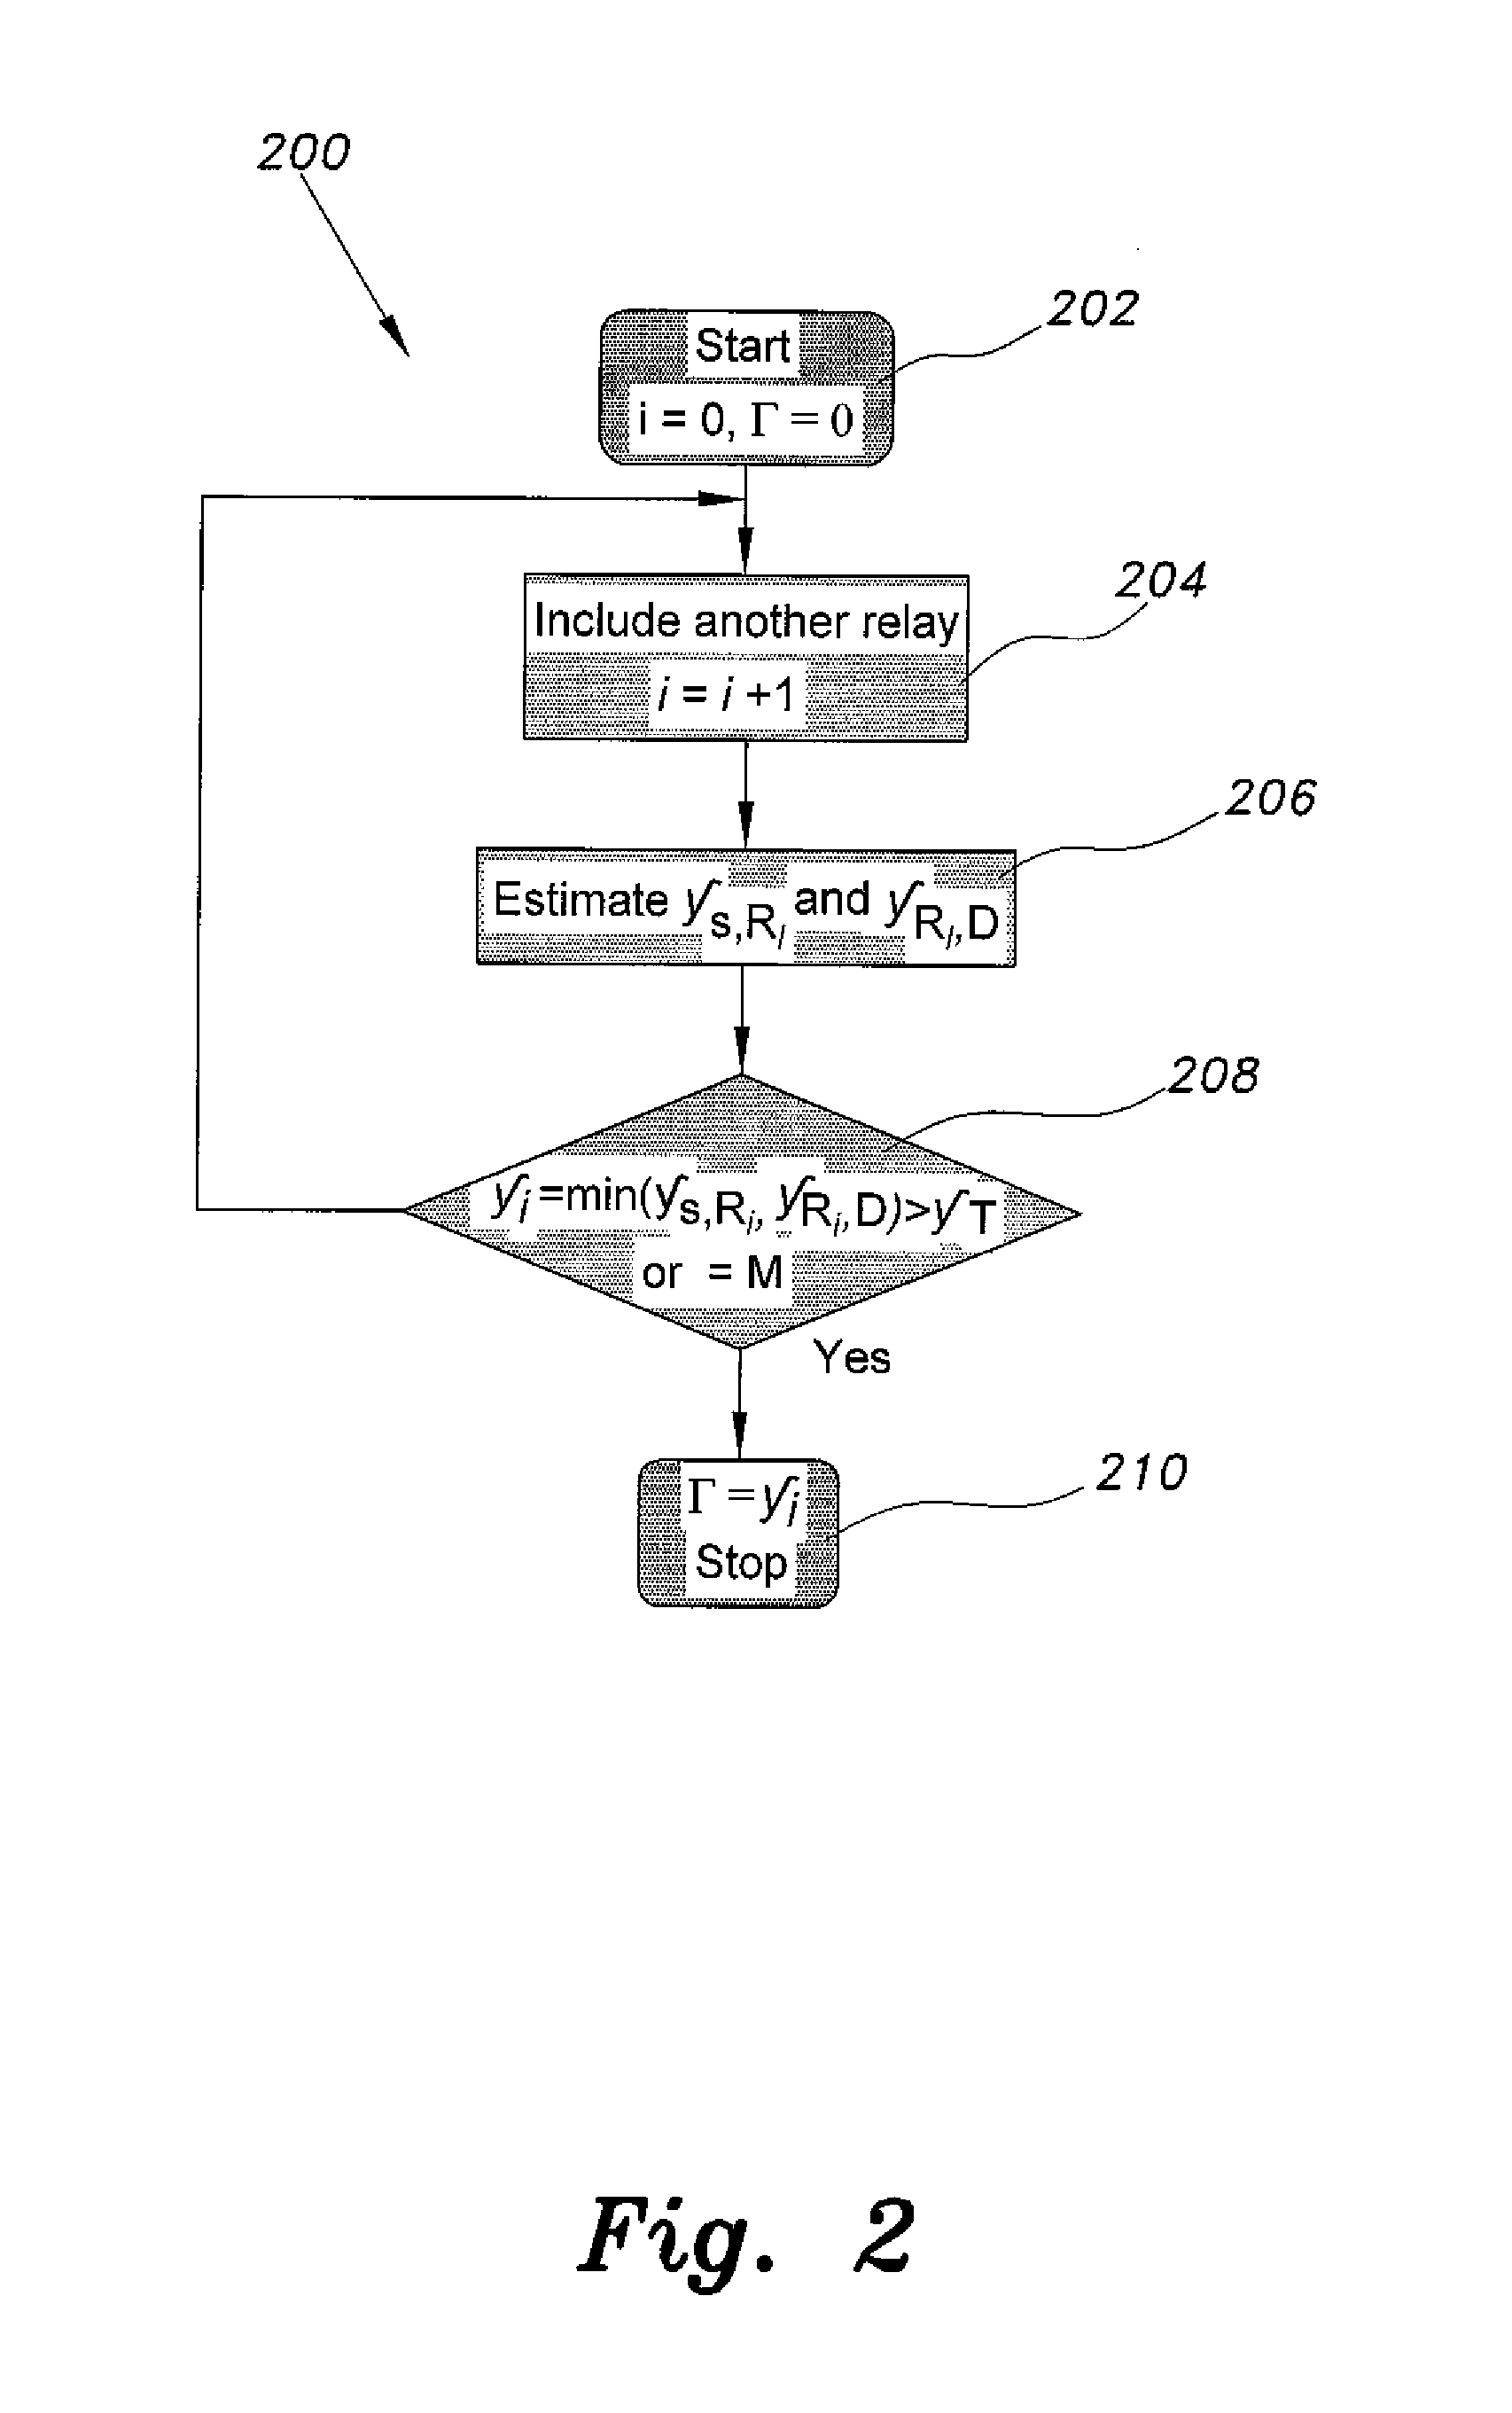 Amplify and forward relay method